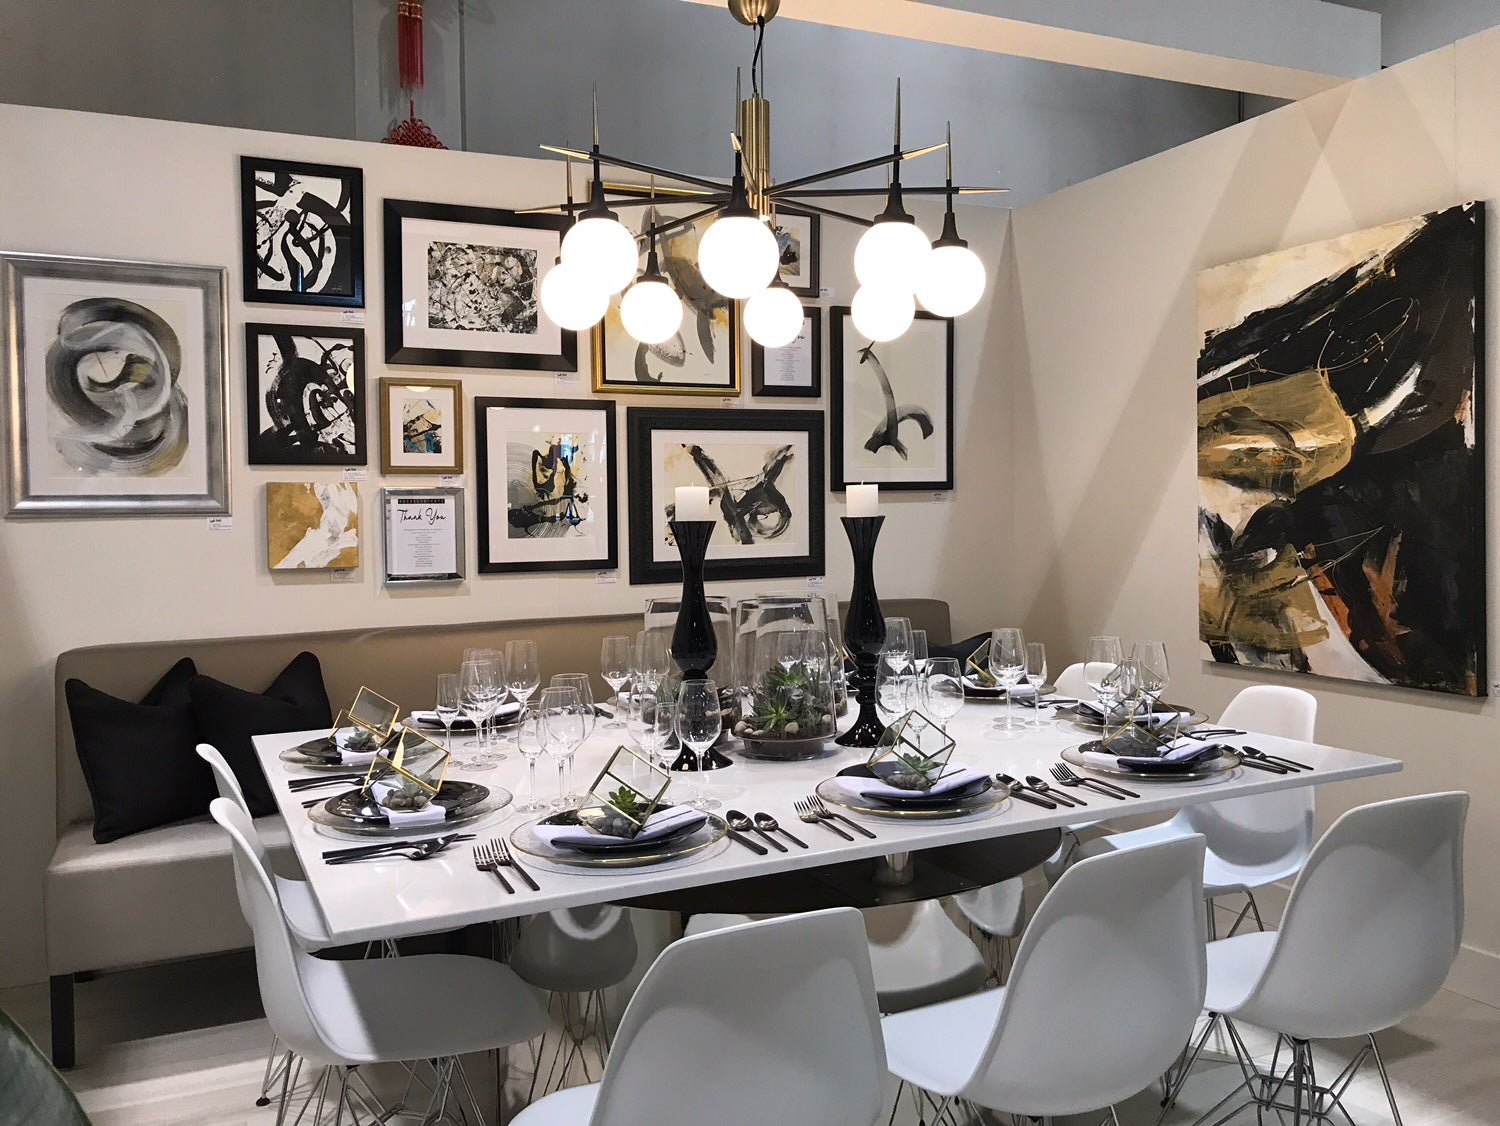 Dinner by Design Calgary: A Sneak Peek at Rochelle Cote’s Contemporary Tablescape